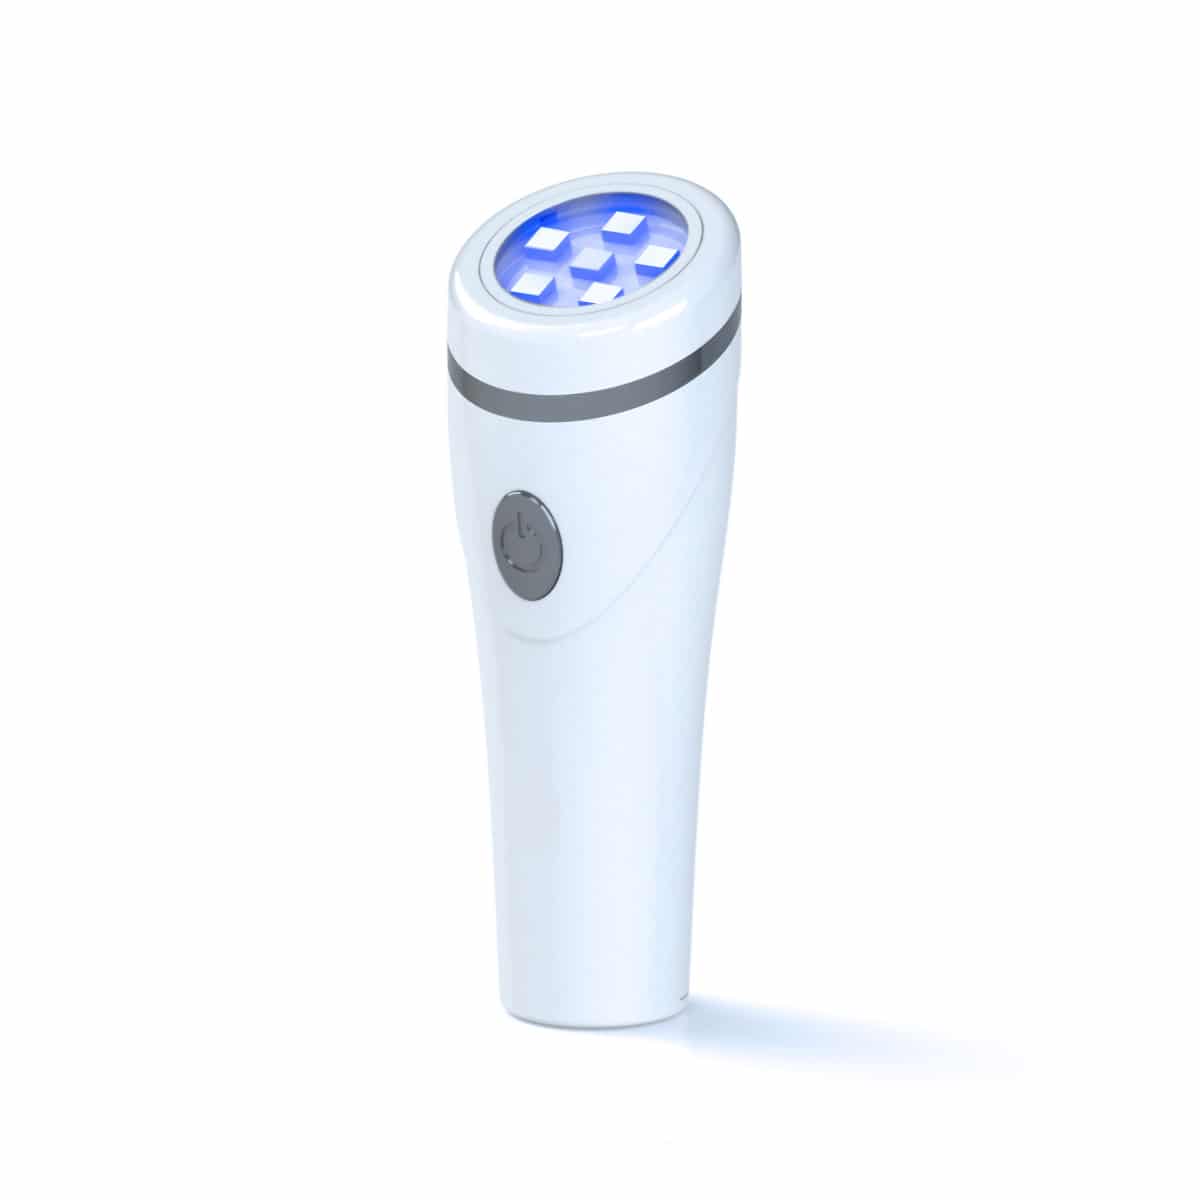 light therapy acne spot treatment reviews